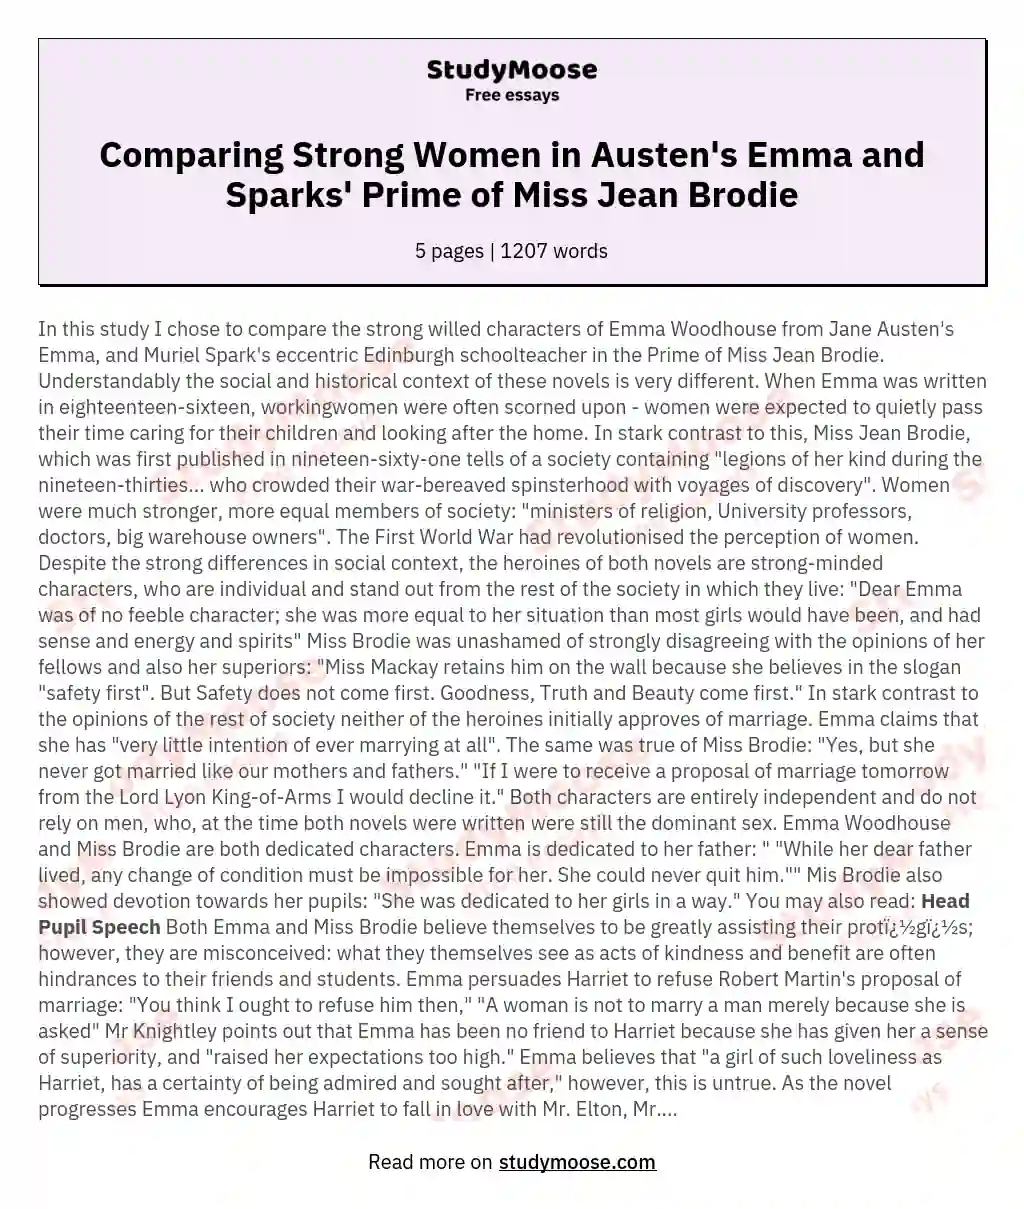 A comparative analysis of strong willed heroines in Jane Austen's Emma and Muriel Spark's Prime of Miss Jean Brodie